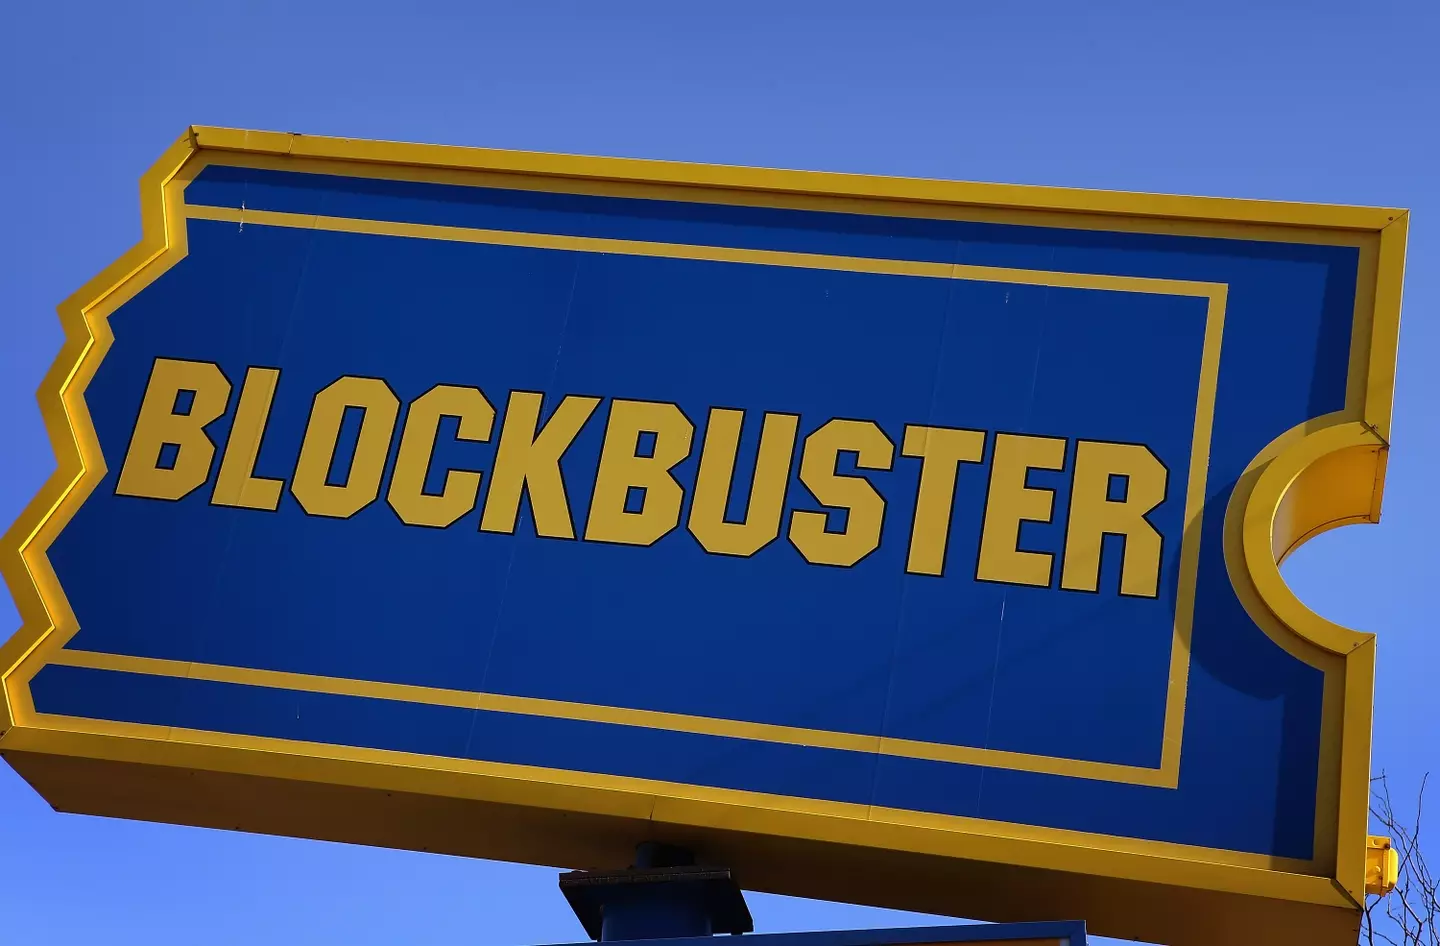 Netflix tried to 'join forces' with Blockbuster back in 2000 (Scott Olson/Getty Images) 